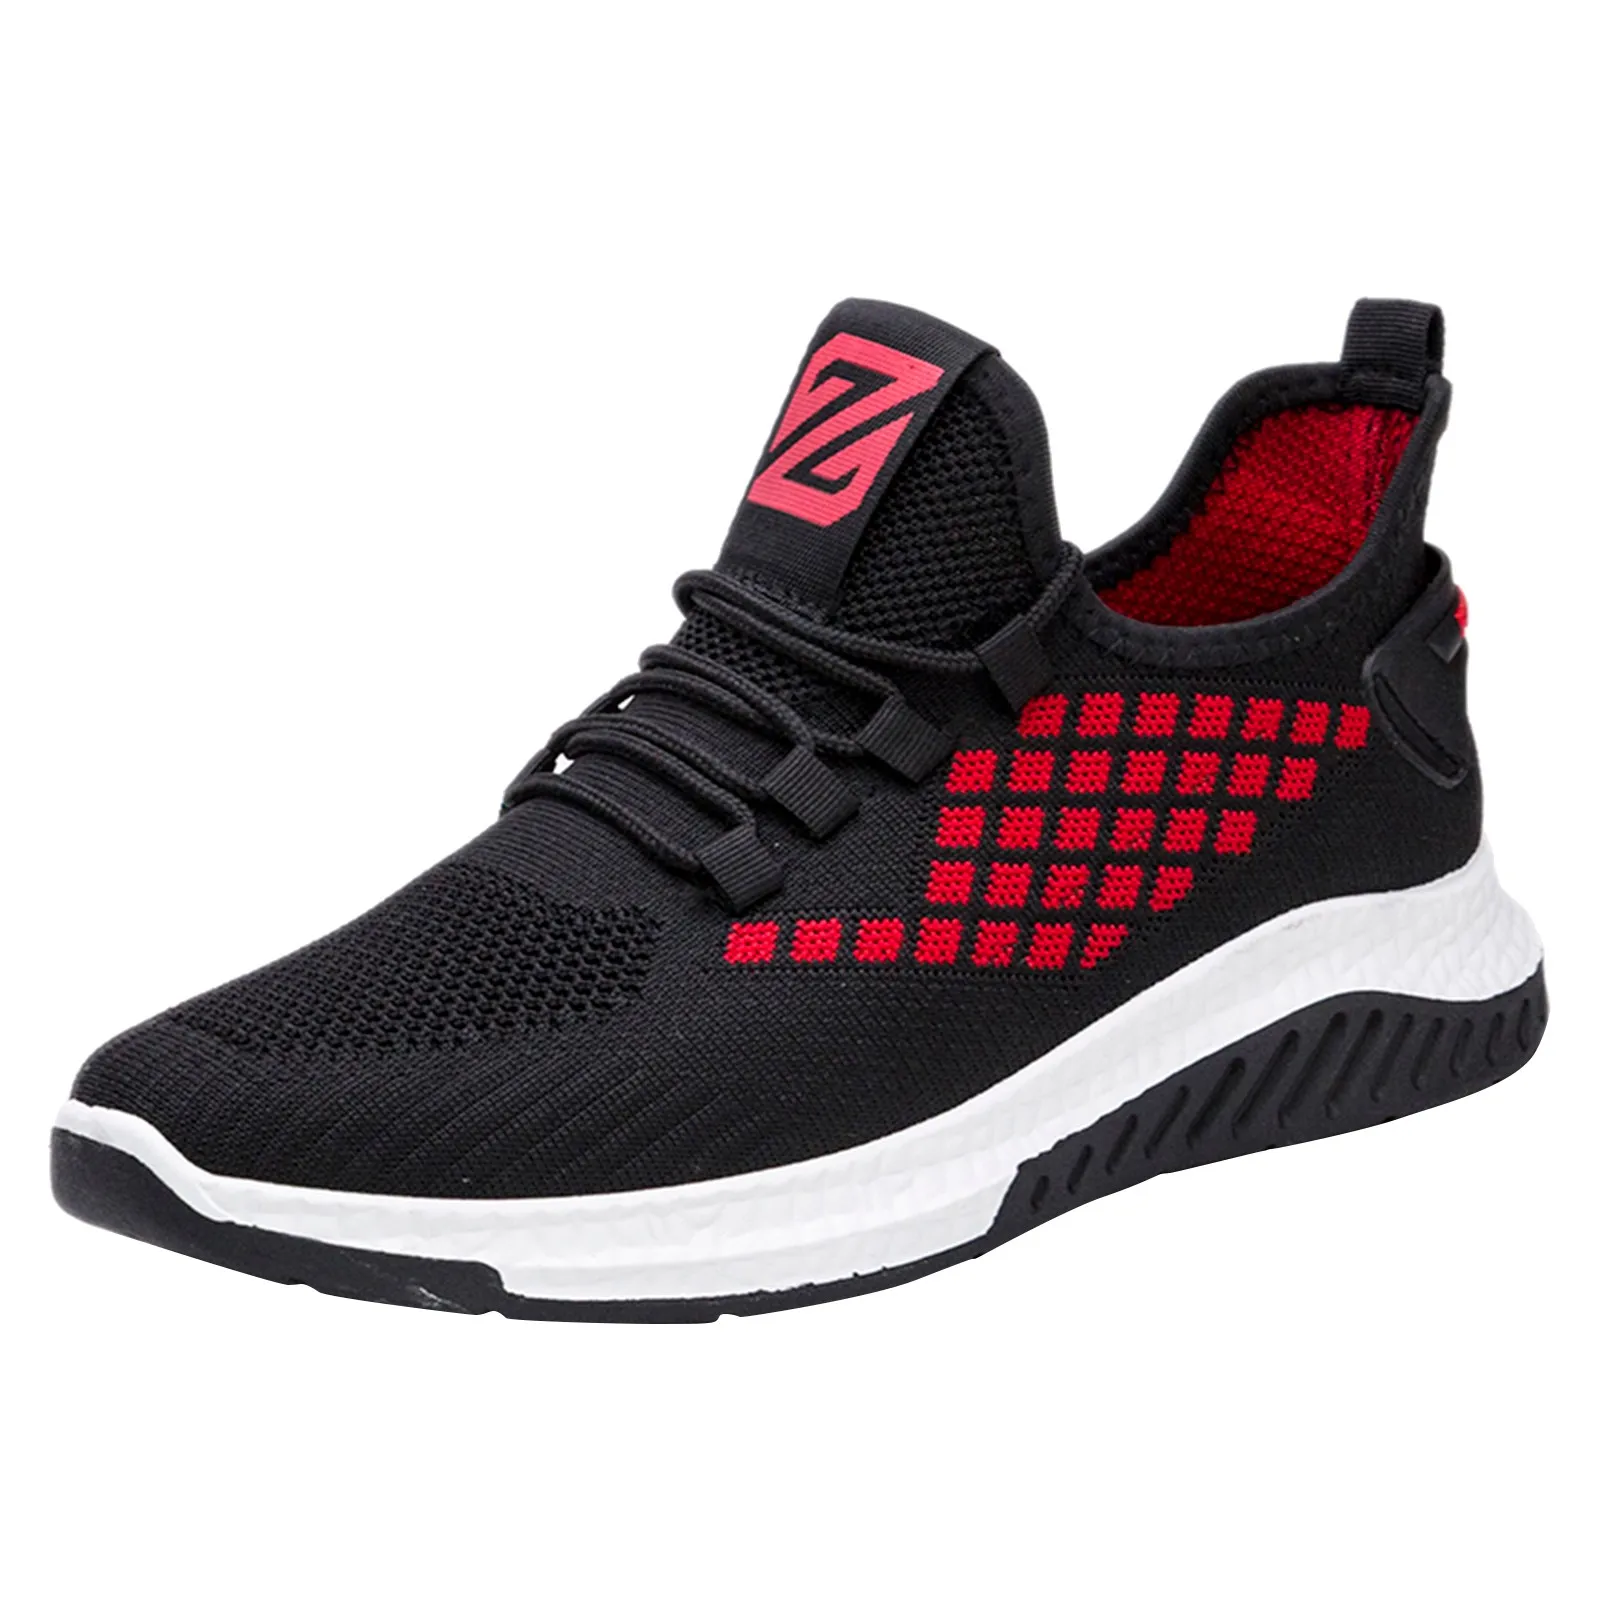 

Fashion Men Sneakers Shoes Casual Breathable Slip-on Wedges Outdoor Leisure Running Sneakers Tenis Masculino Zapatillas Hombre